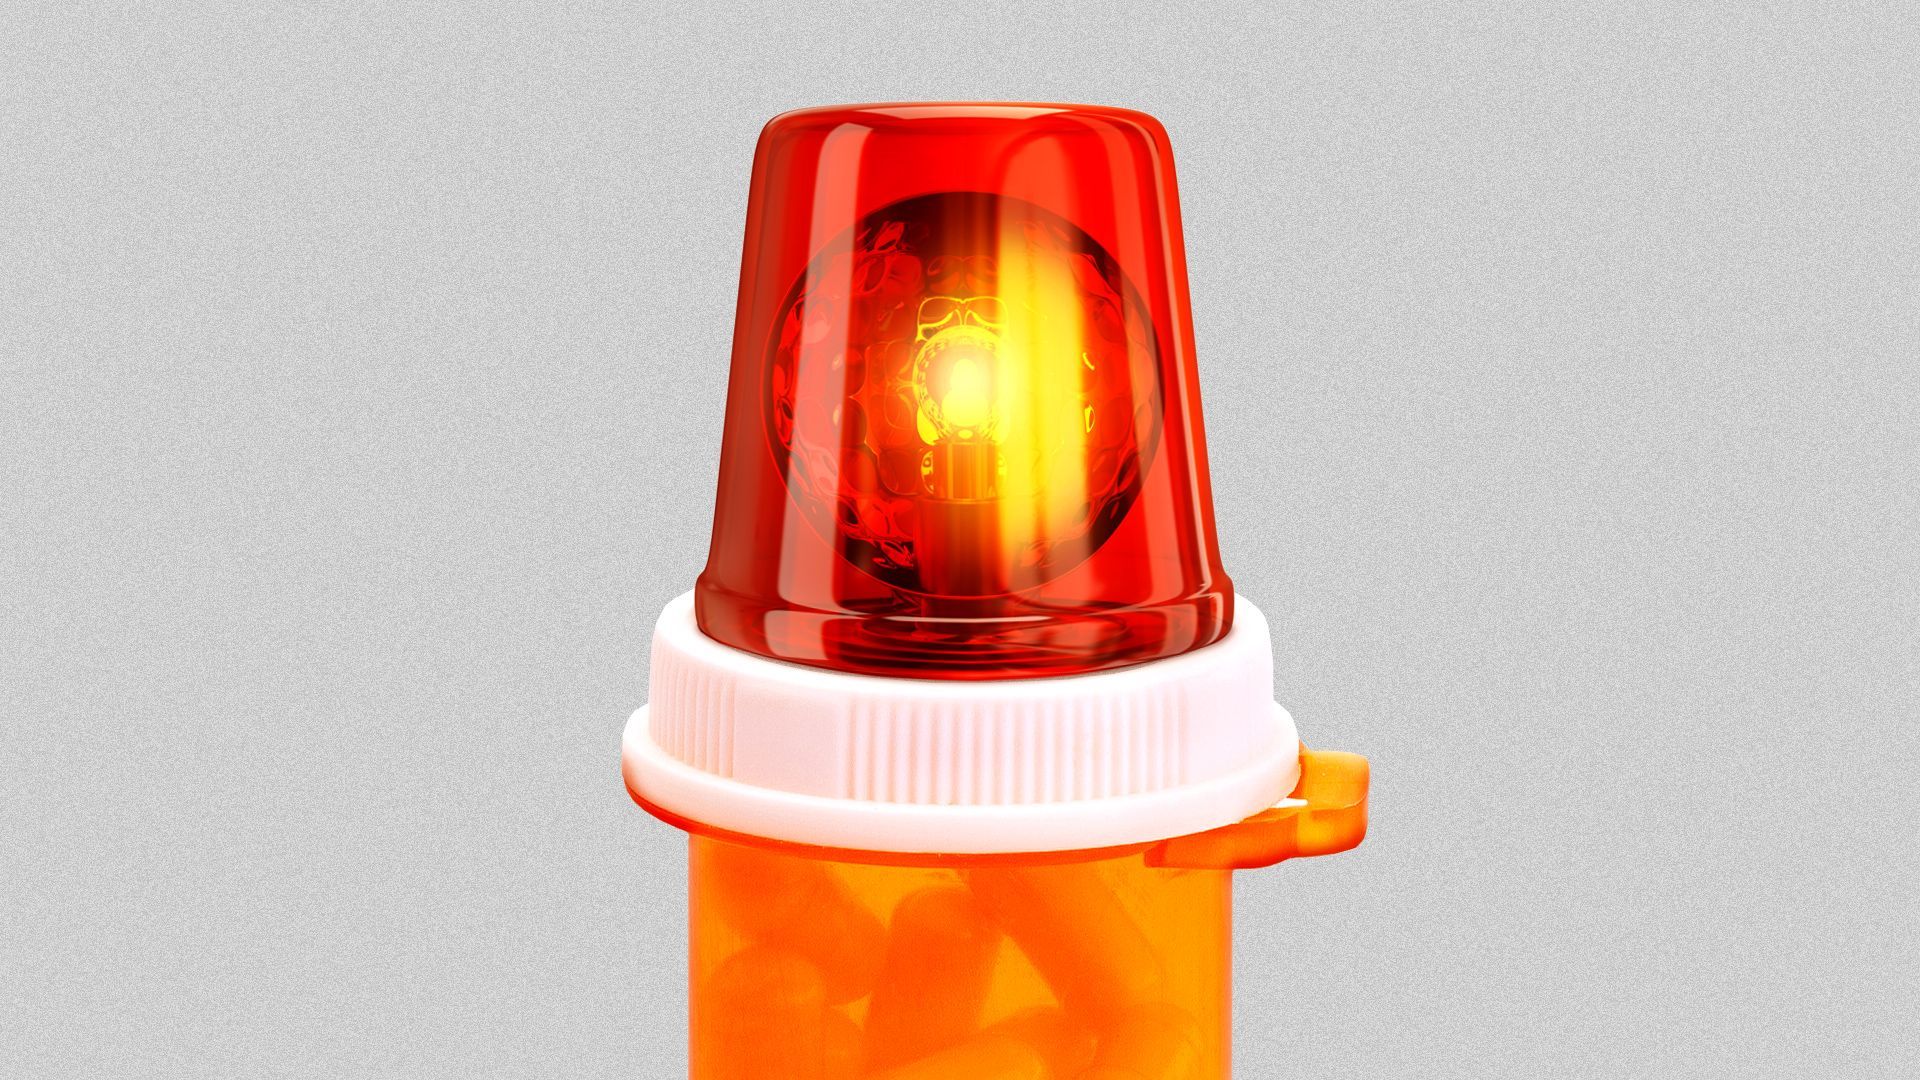 Illustration of prescription pill bottle with a siren as the cap.